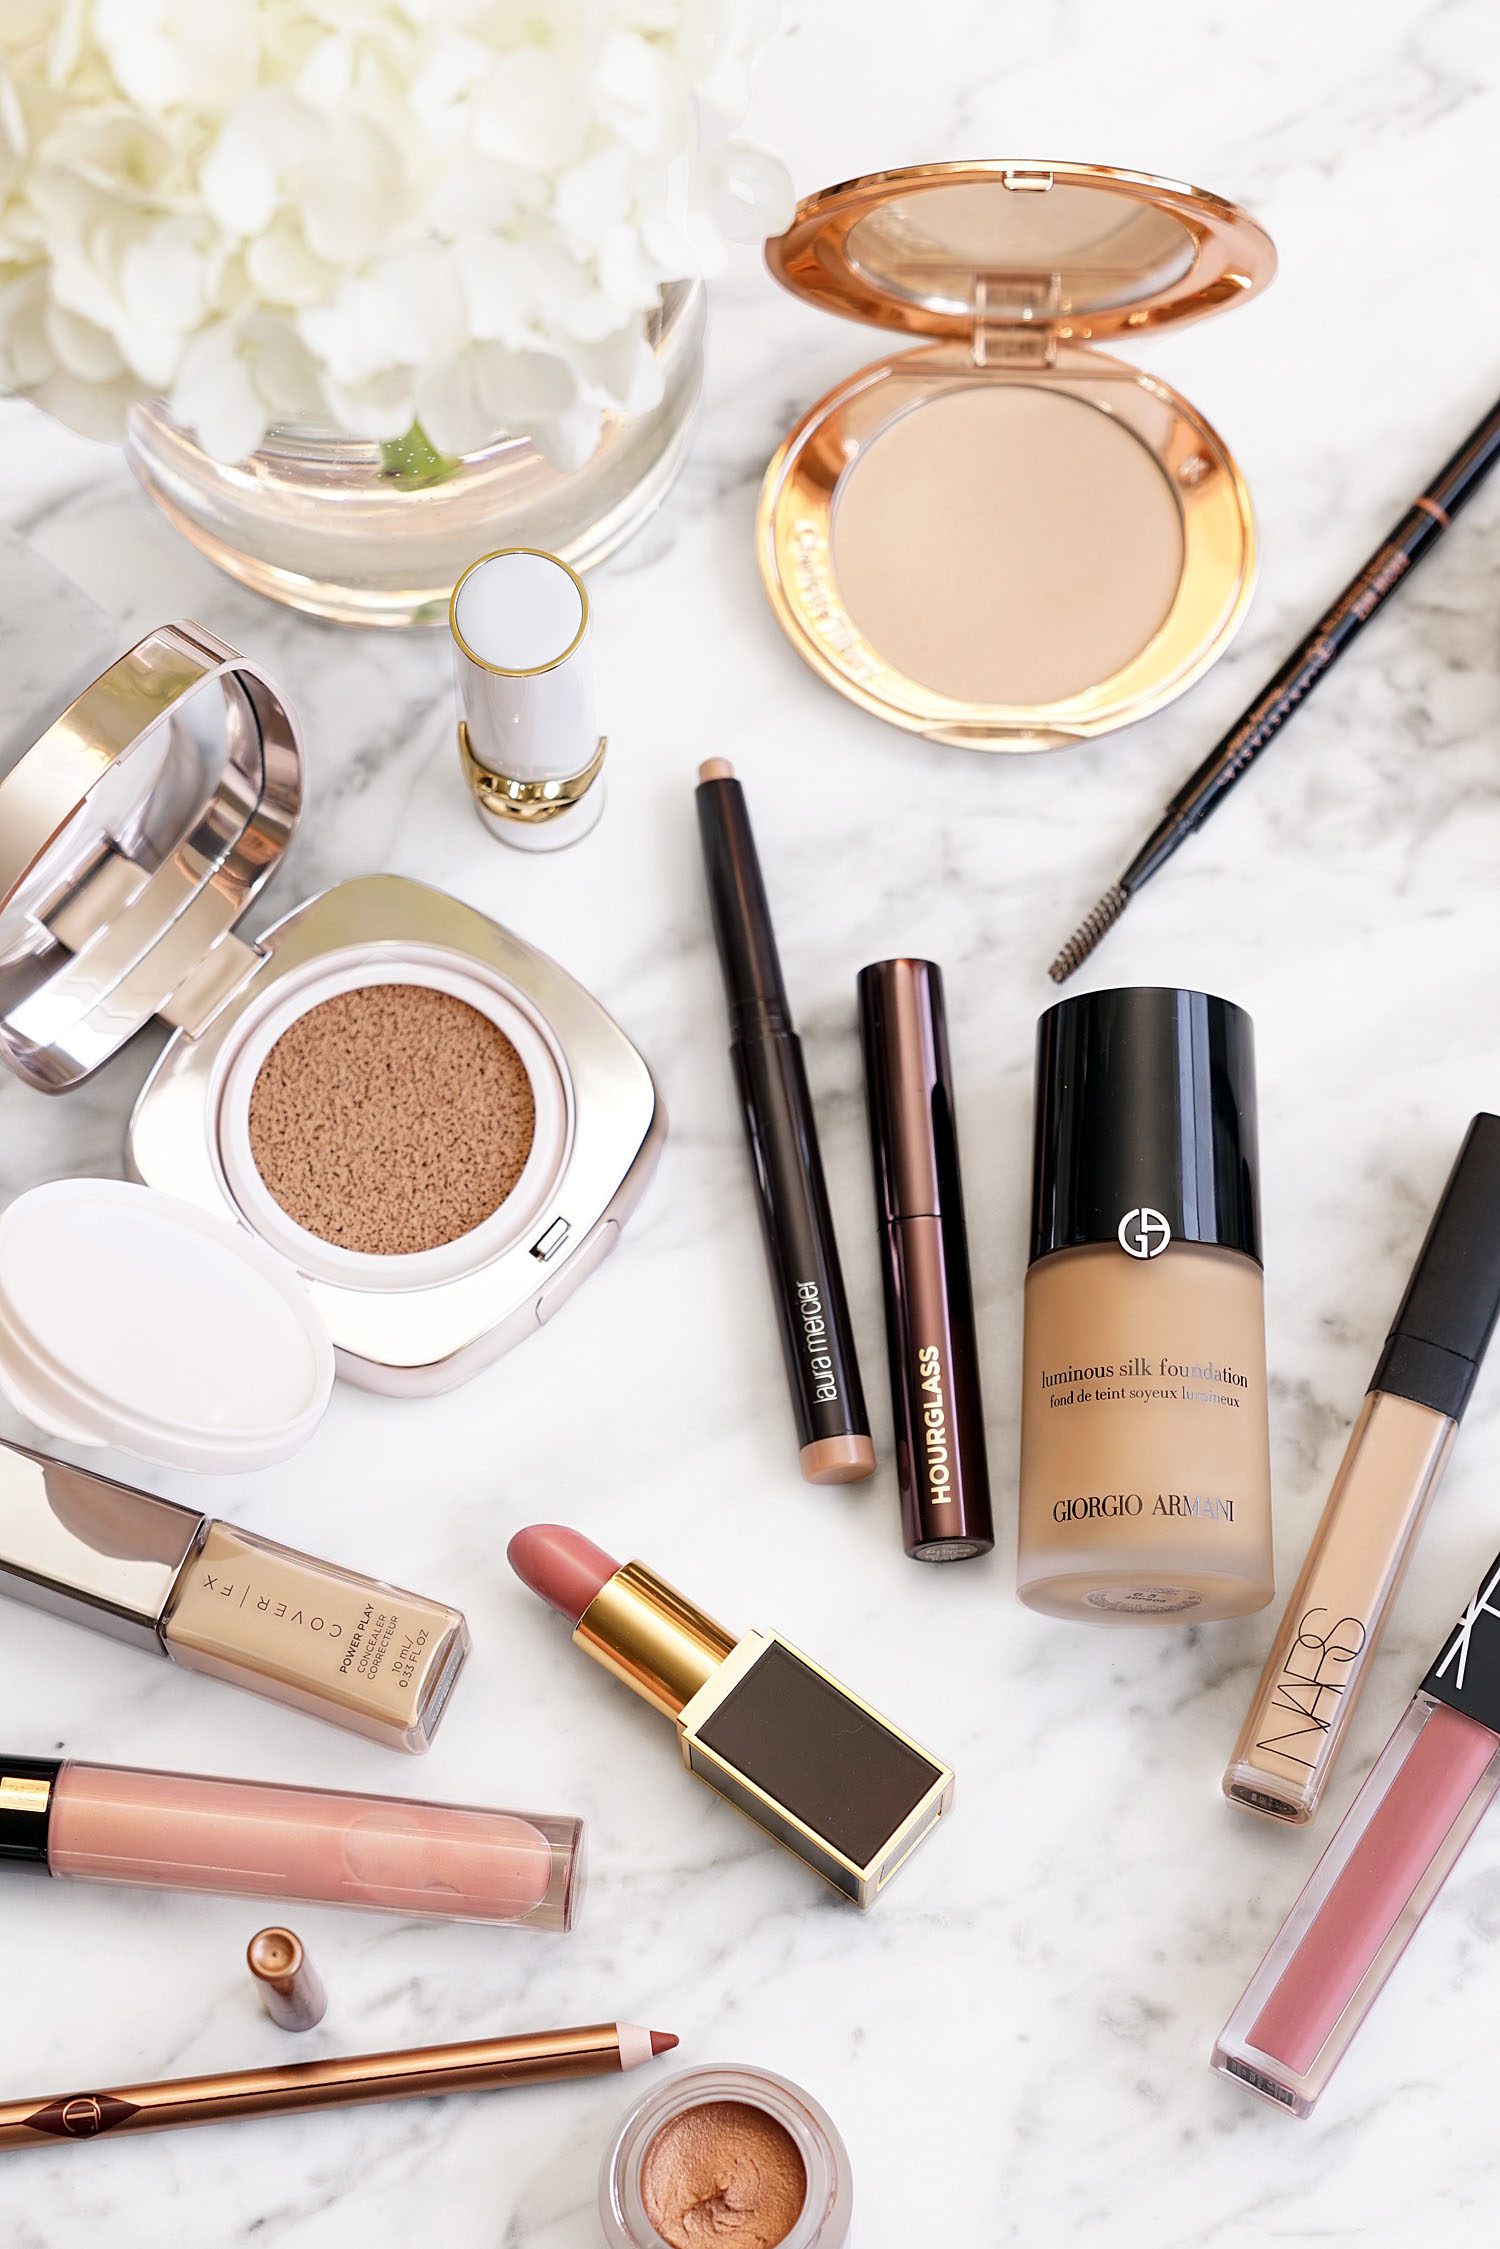 Top Makeup Favorites Can Find At Sephora - The Beauty